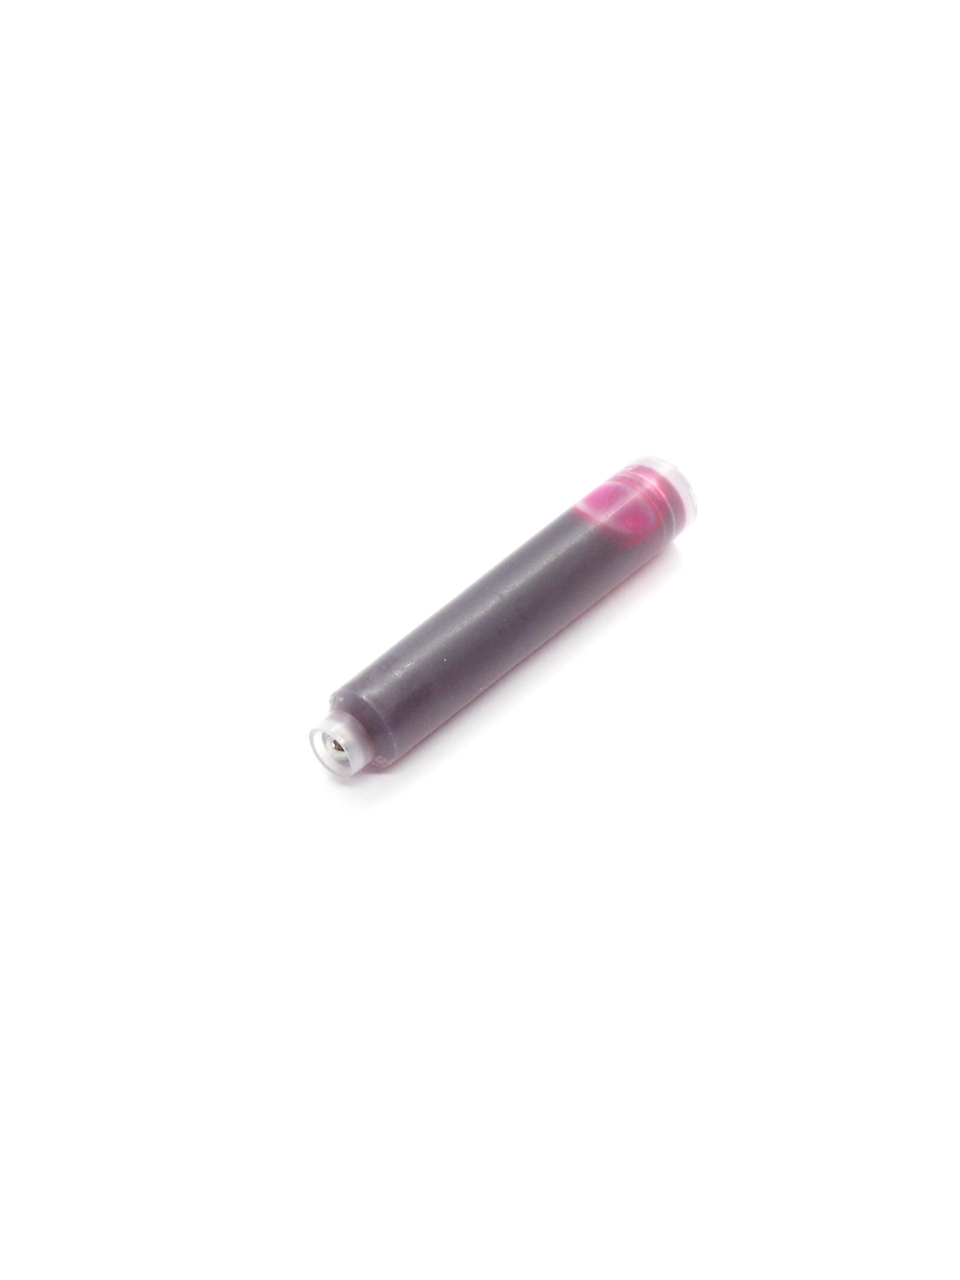 Cartridges For Jinhao Fountain Pens (Pink)